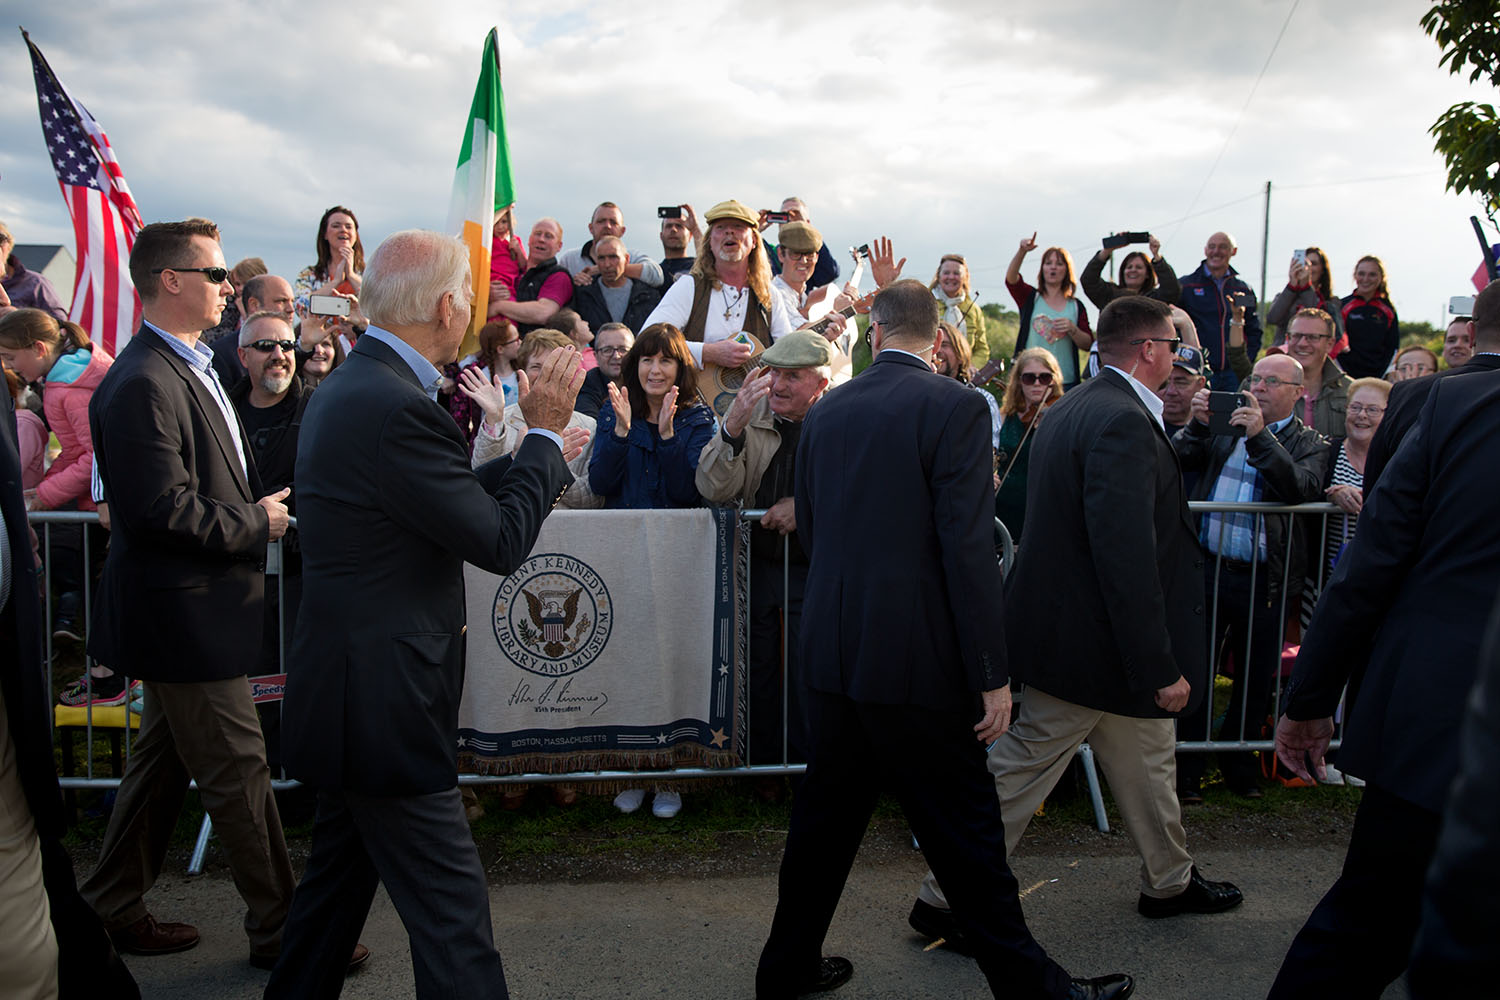 Vice President Joe Biden waves to people lined up to see him outside Lily Finnegan's Pub which was formerly owned by distant relatives of the Vice president, in County Louth, Ireland, June 25, 2016. (Official White House Photo by David Lienemann)